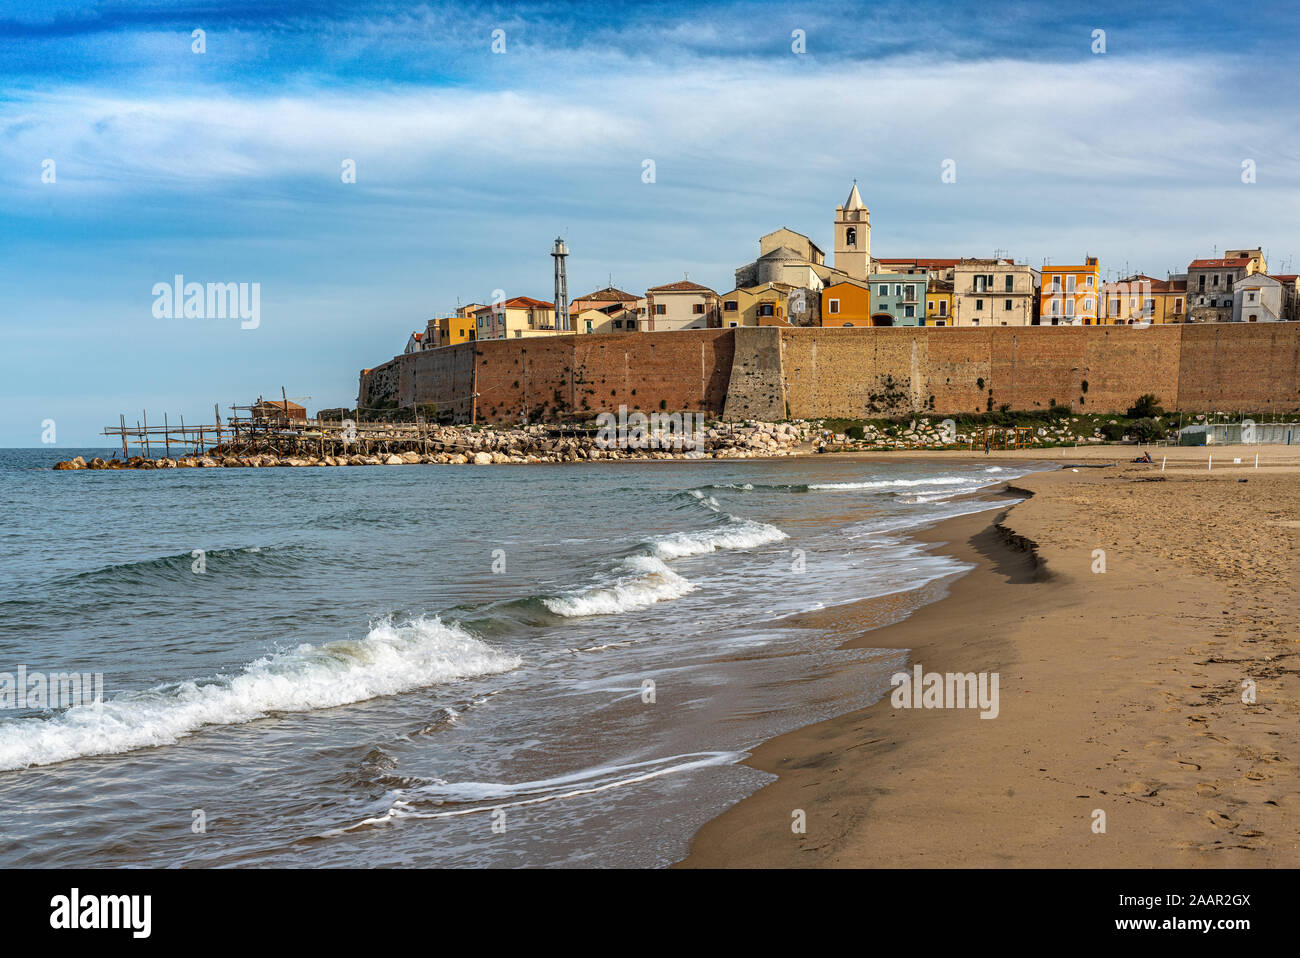 View of the city of Termoli in Italy from the golden beach of the Adriatic sea Stock Photo